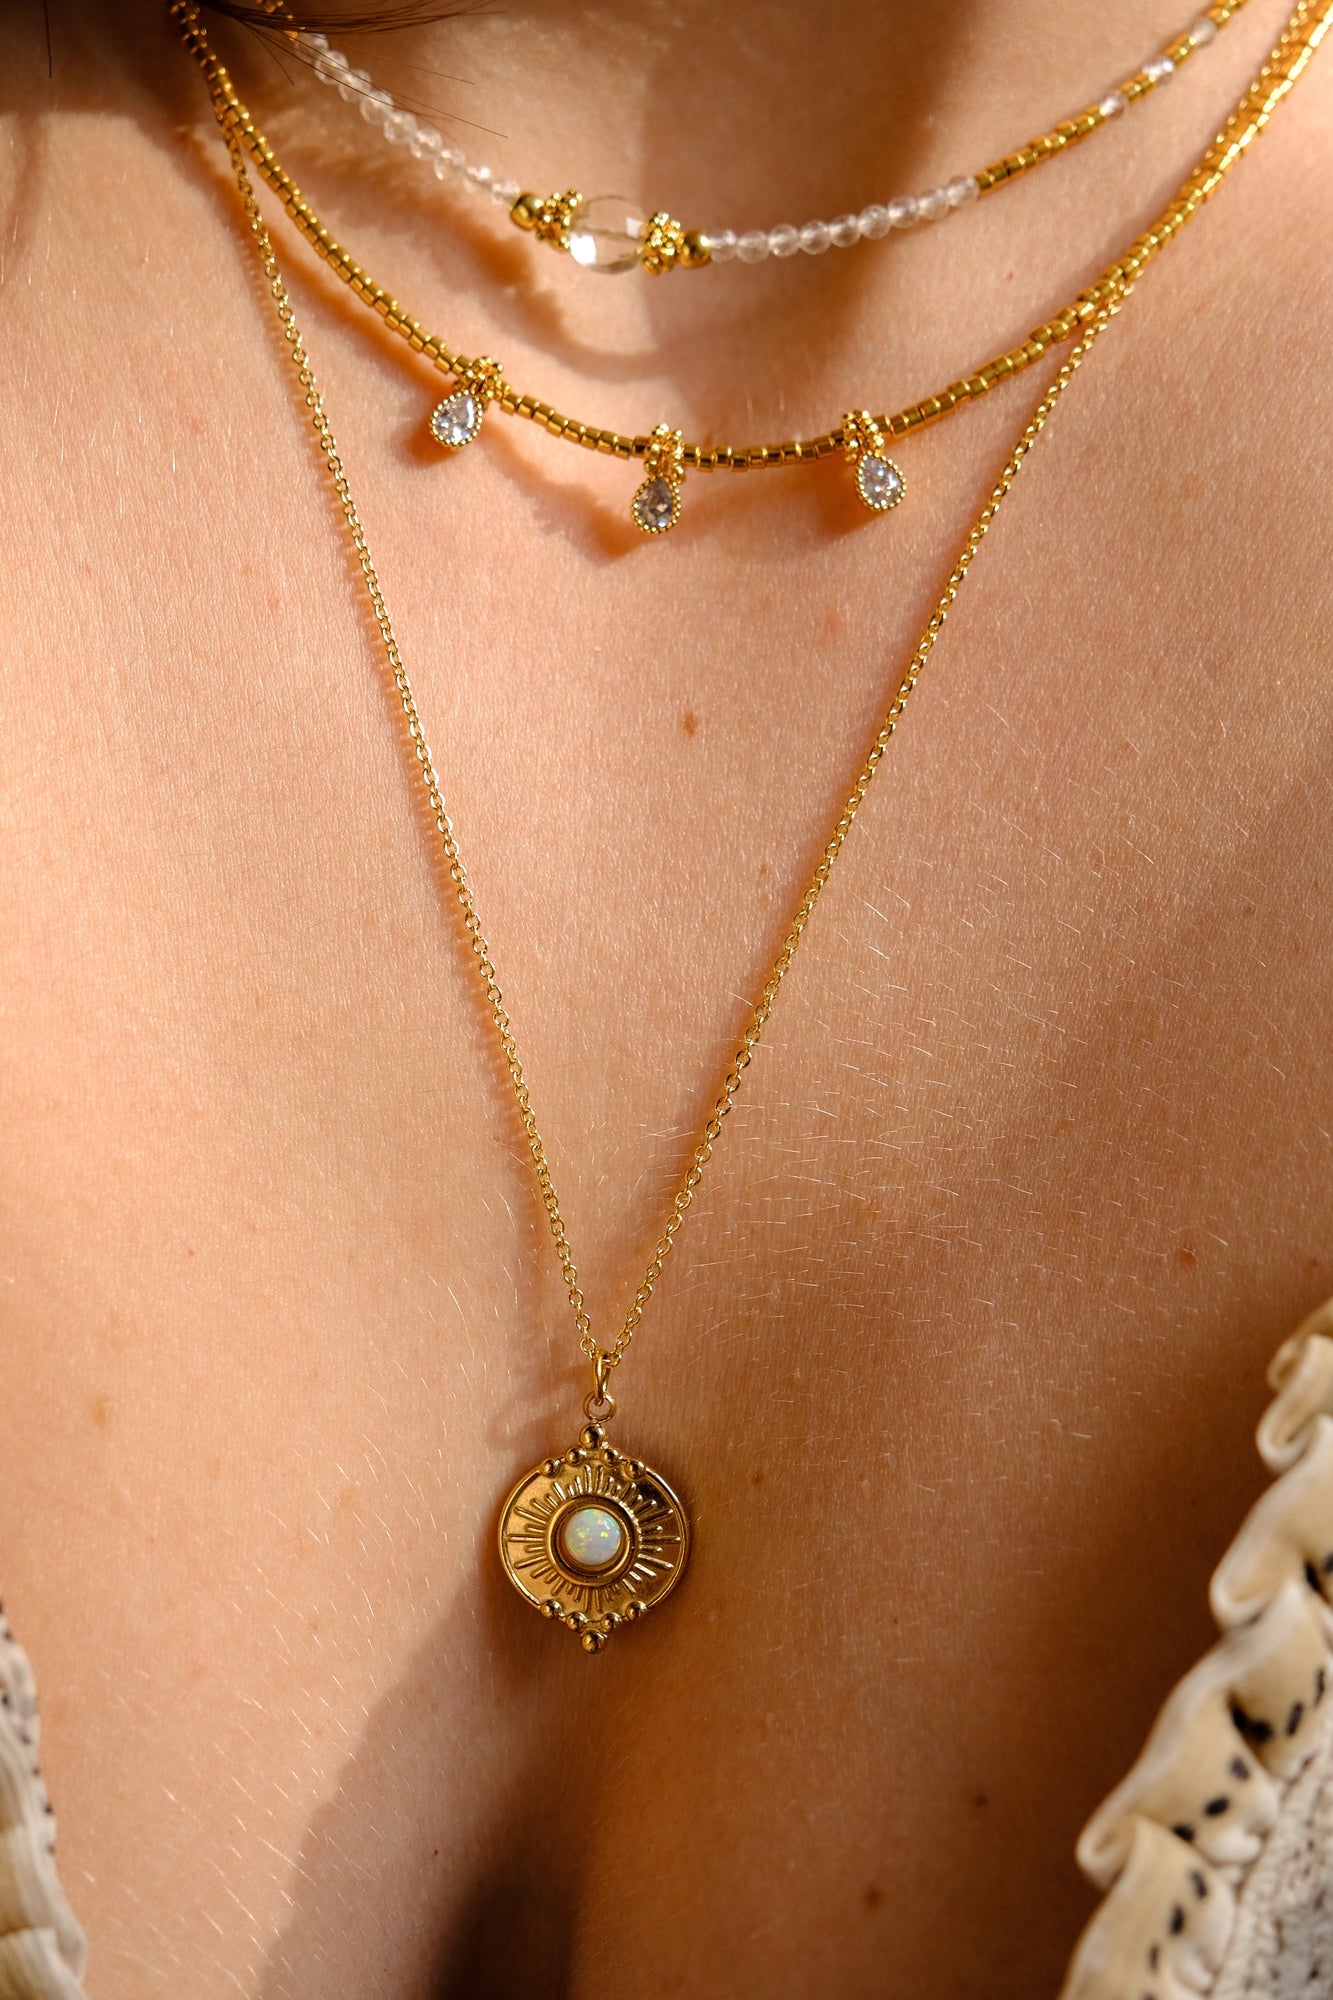 “Althea” necklace (of your choice)